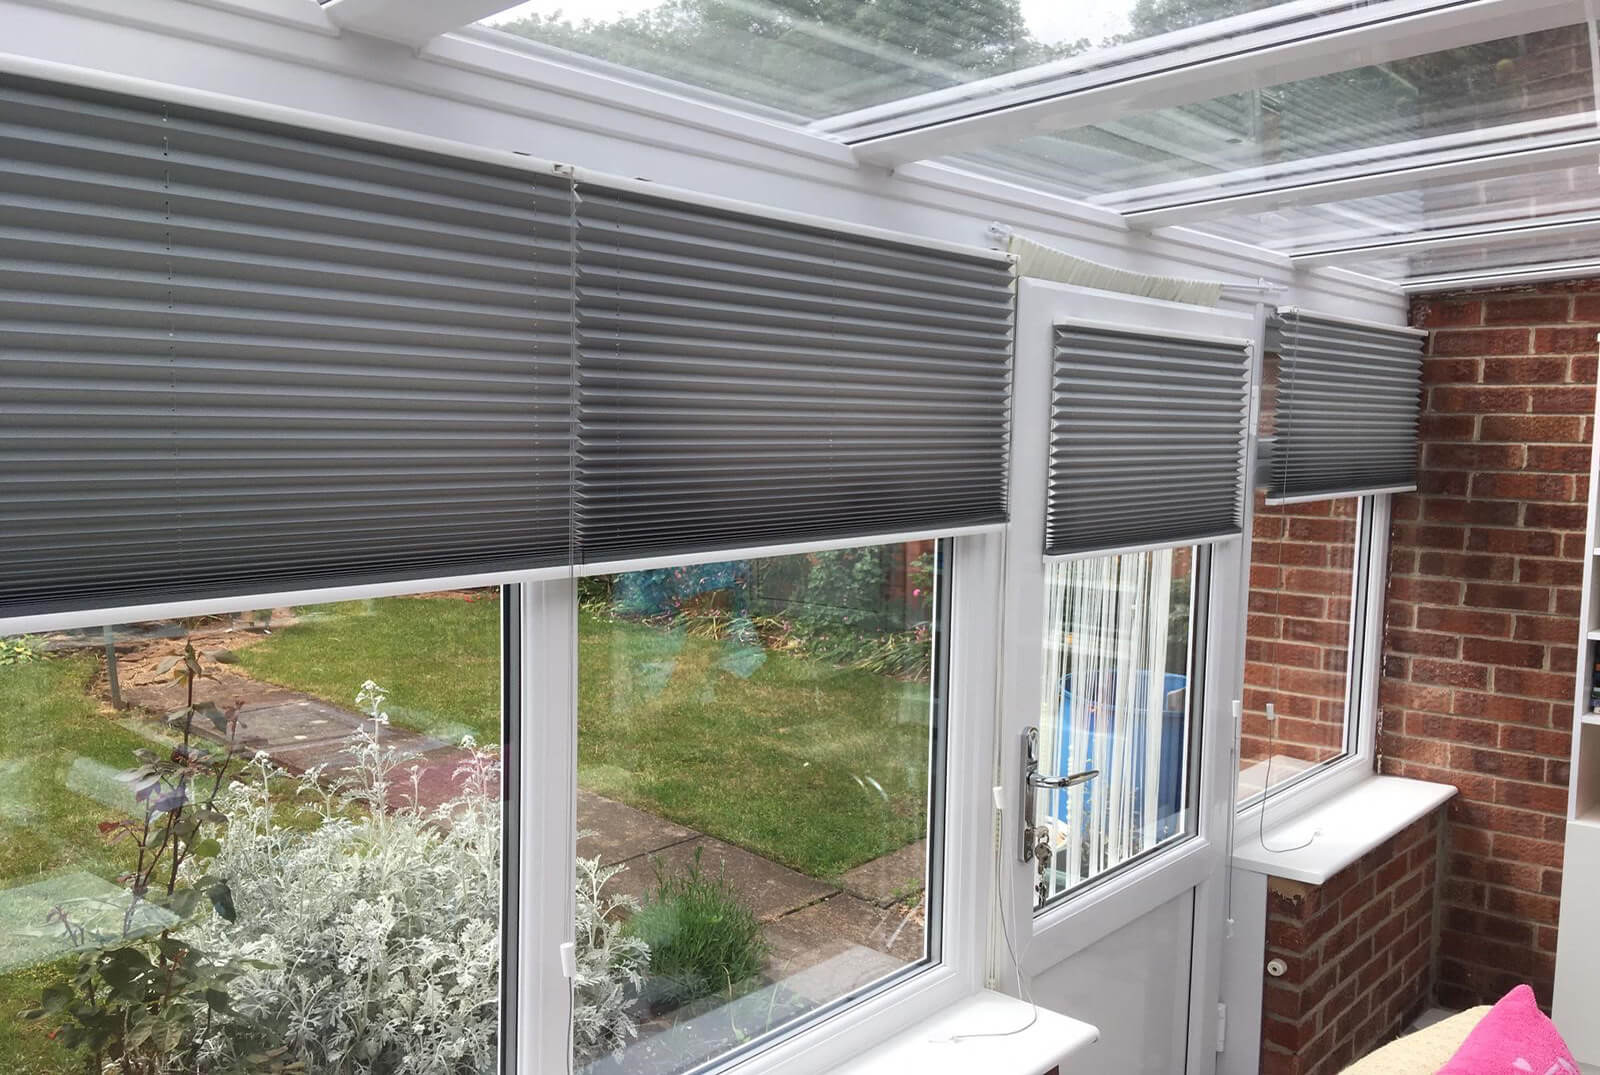 Suppliers of Neatly Folding Pleated Blinds